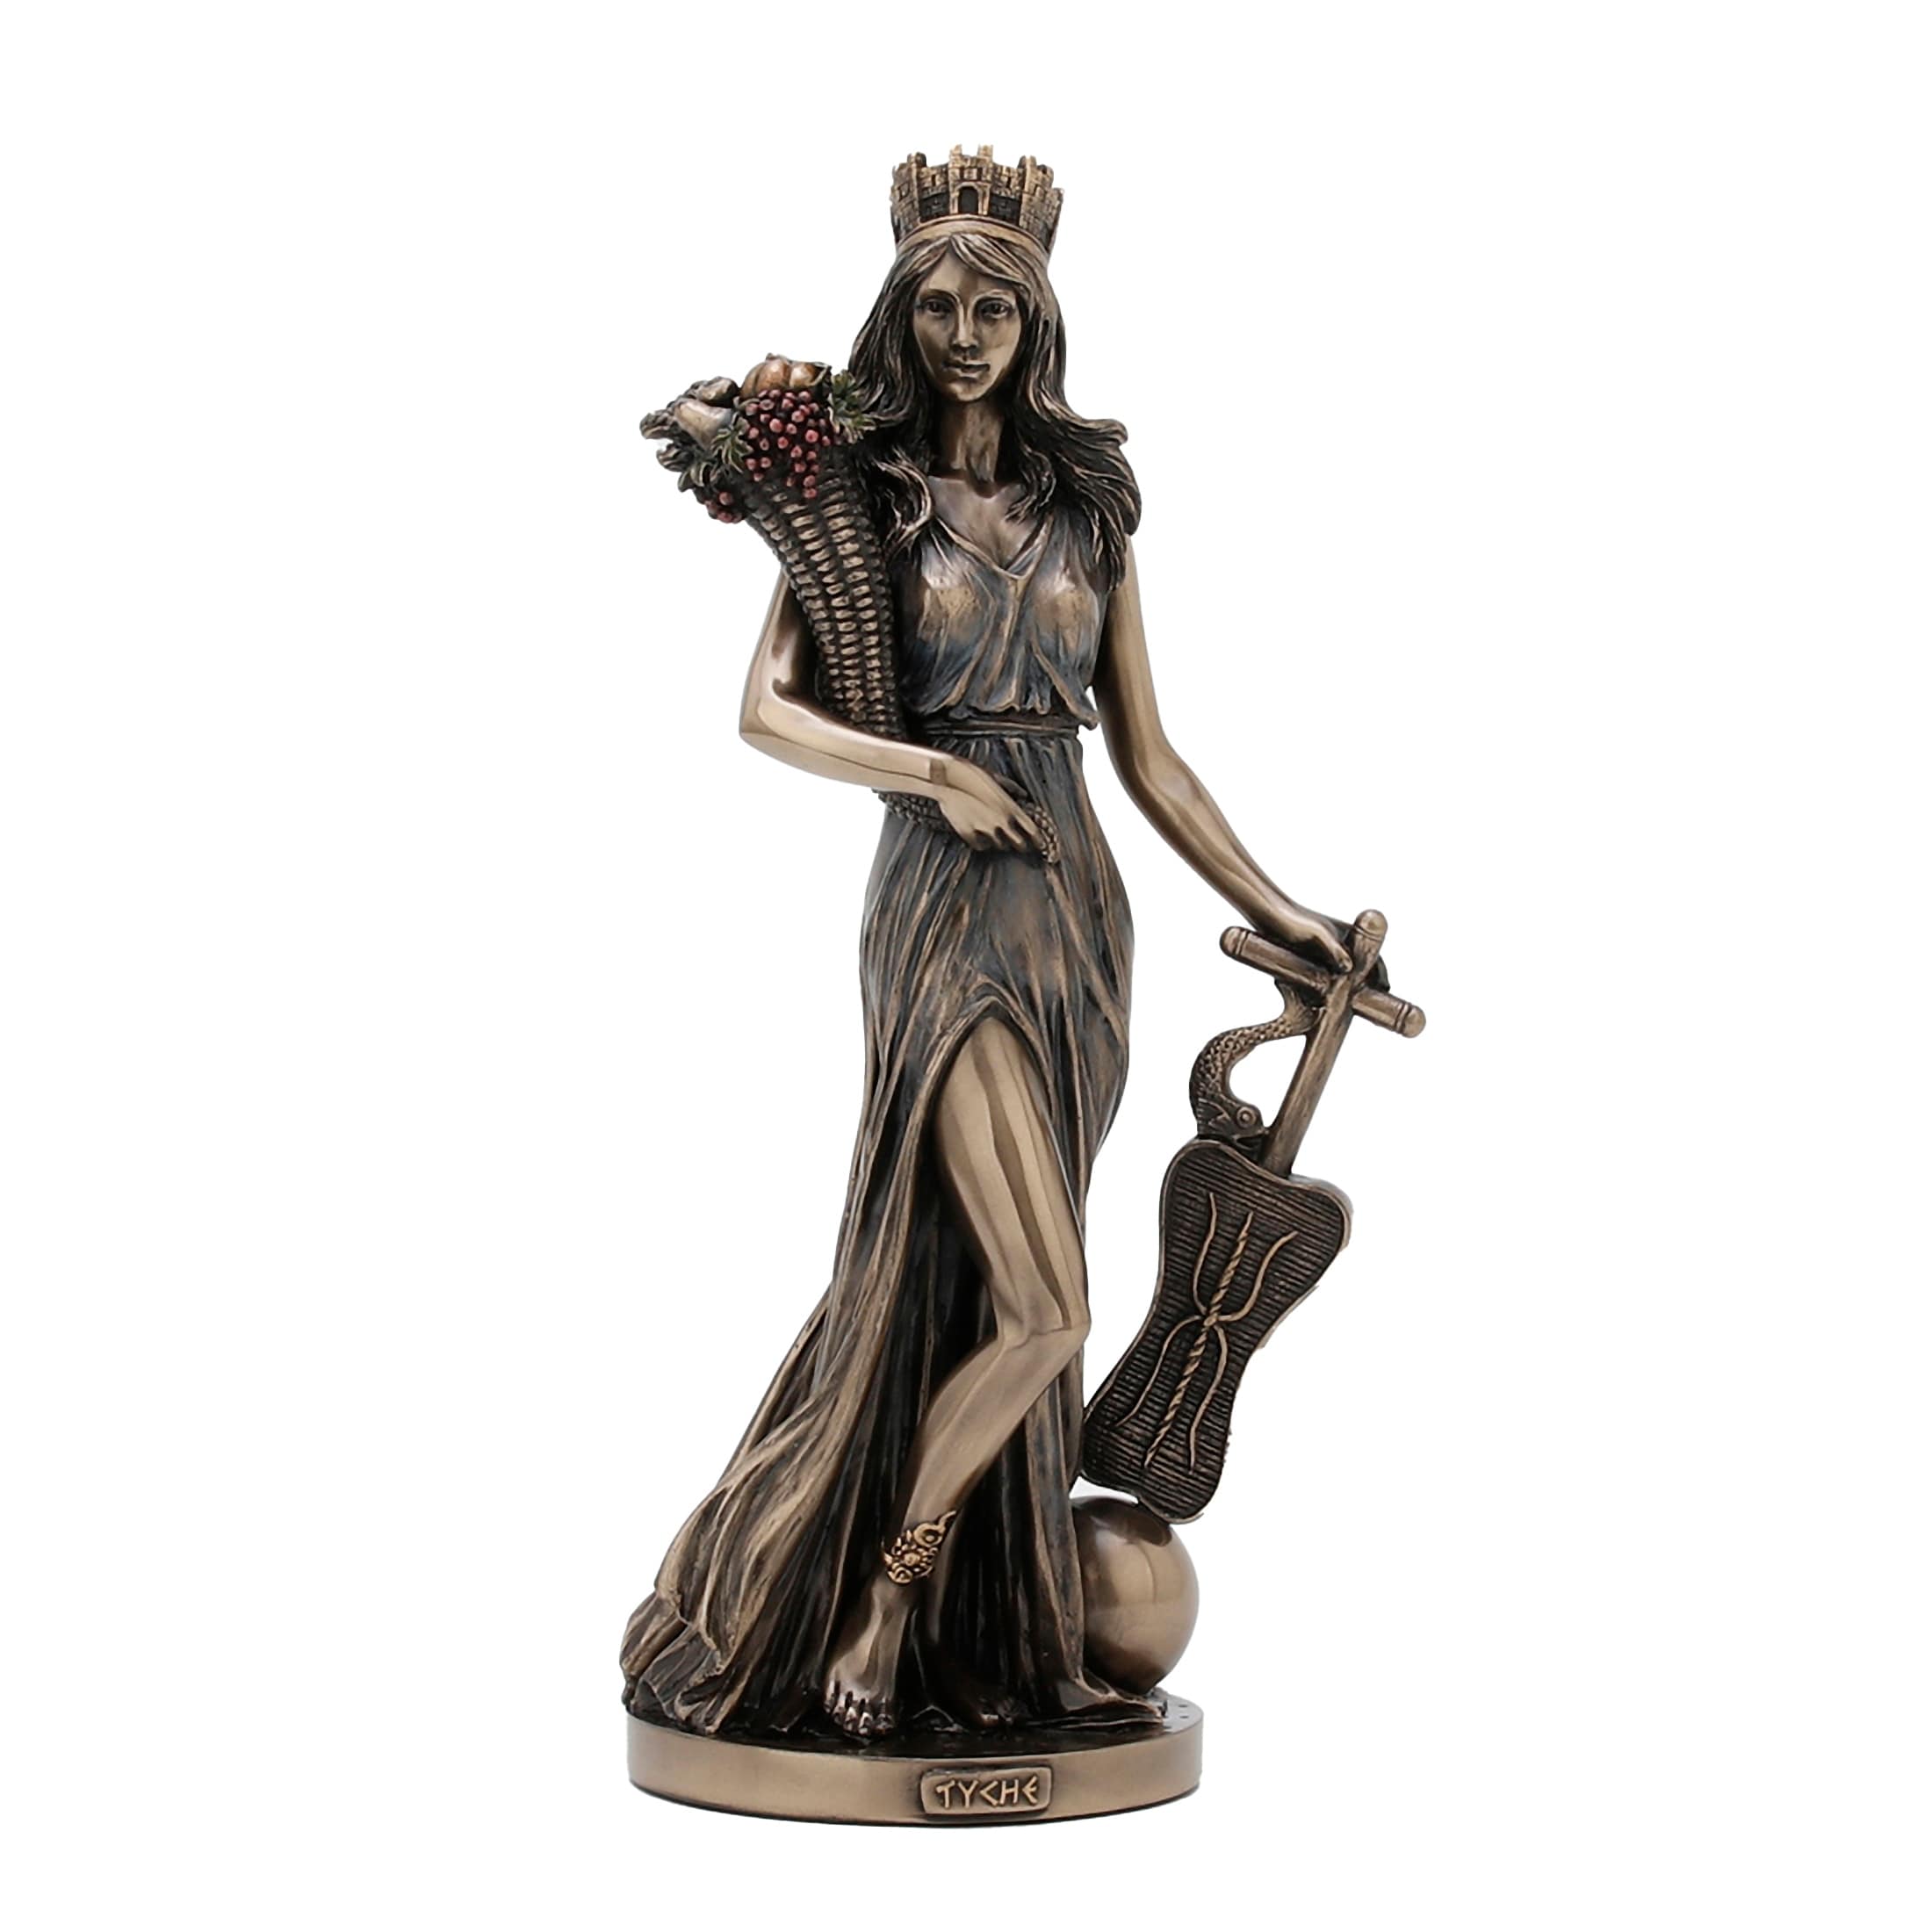 Goddess Of Wealth Tyche Lady Luck Fortuna Statue Resin Greek Sculpture Decor 13" 